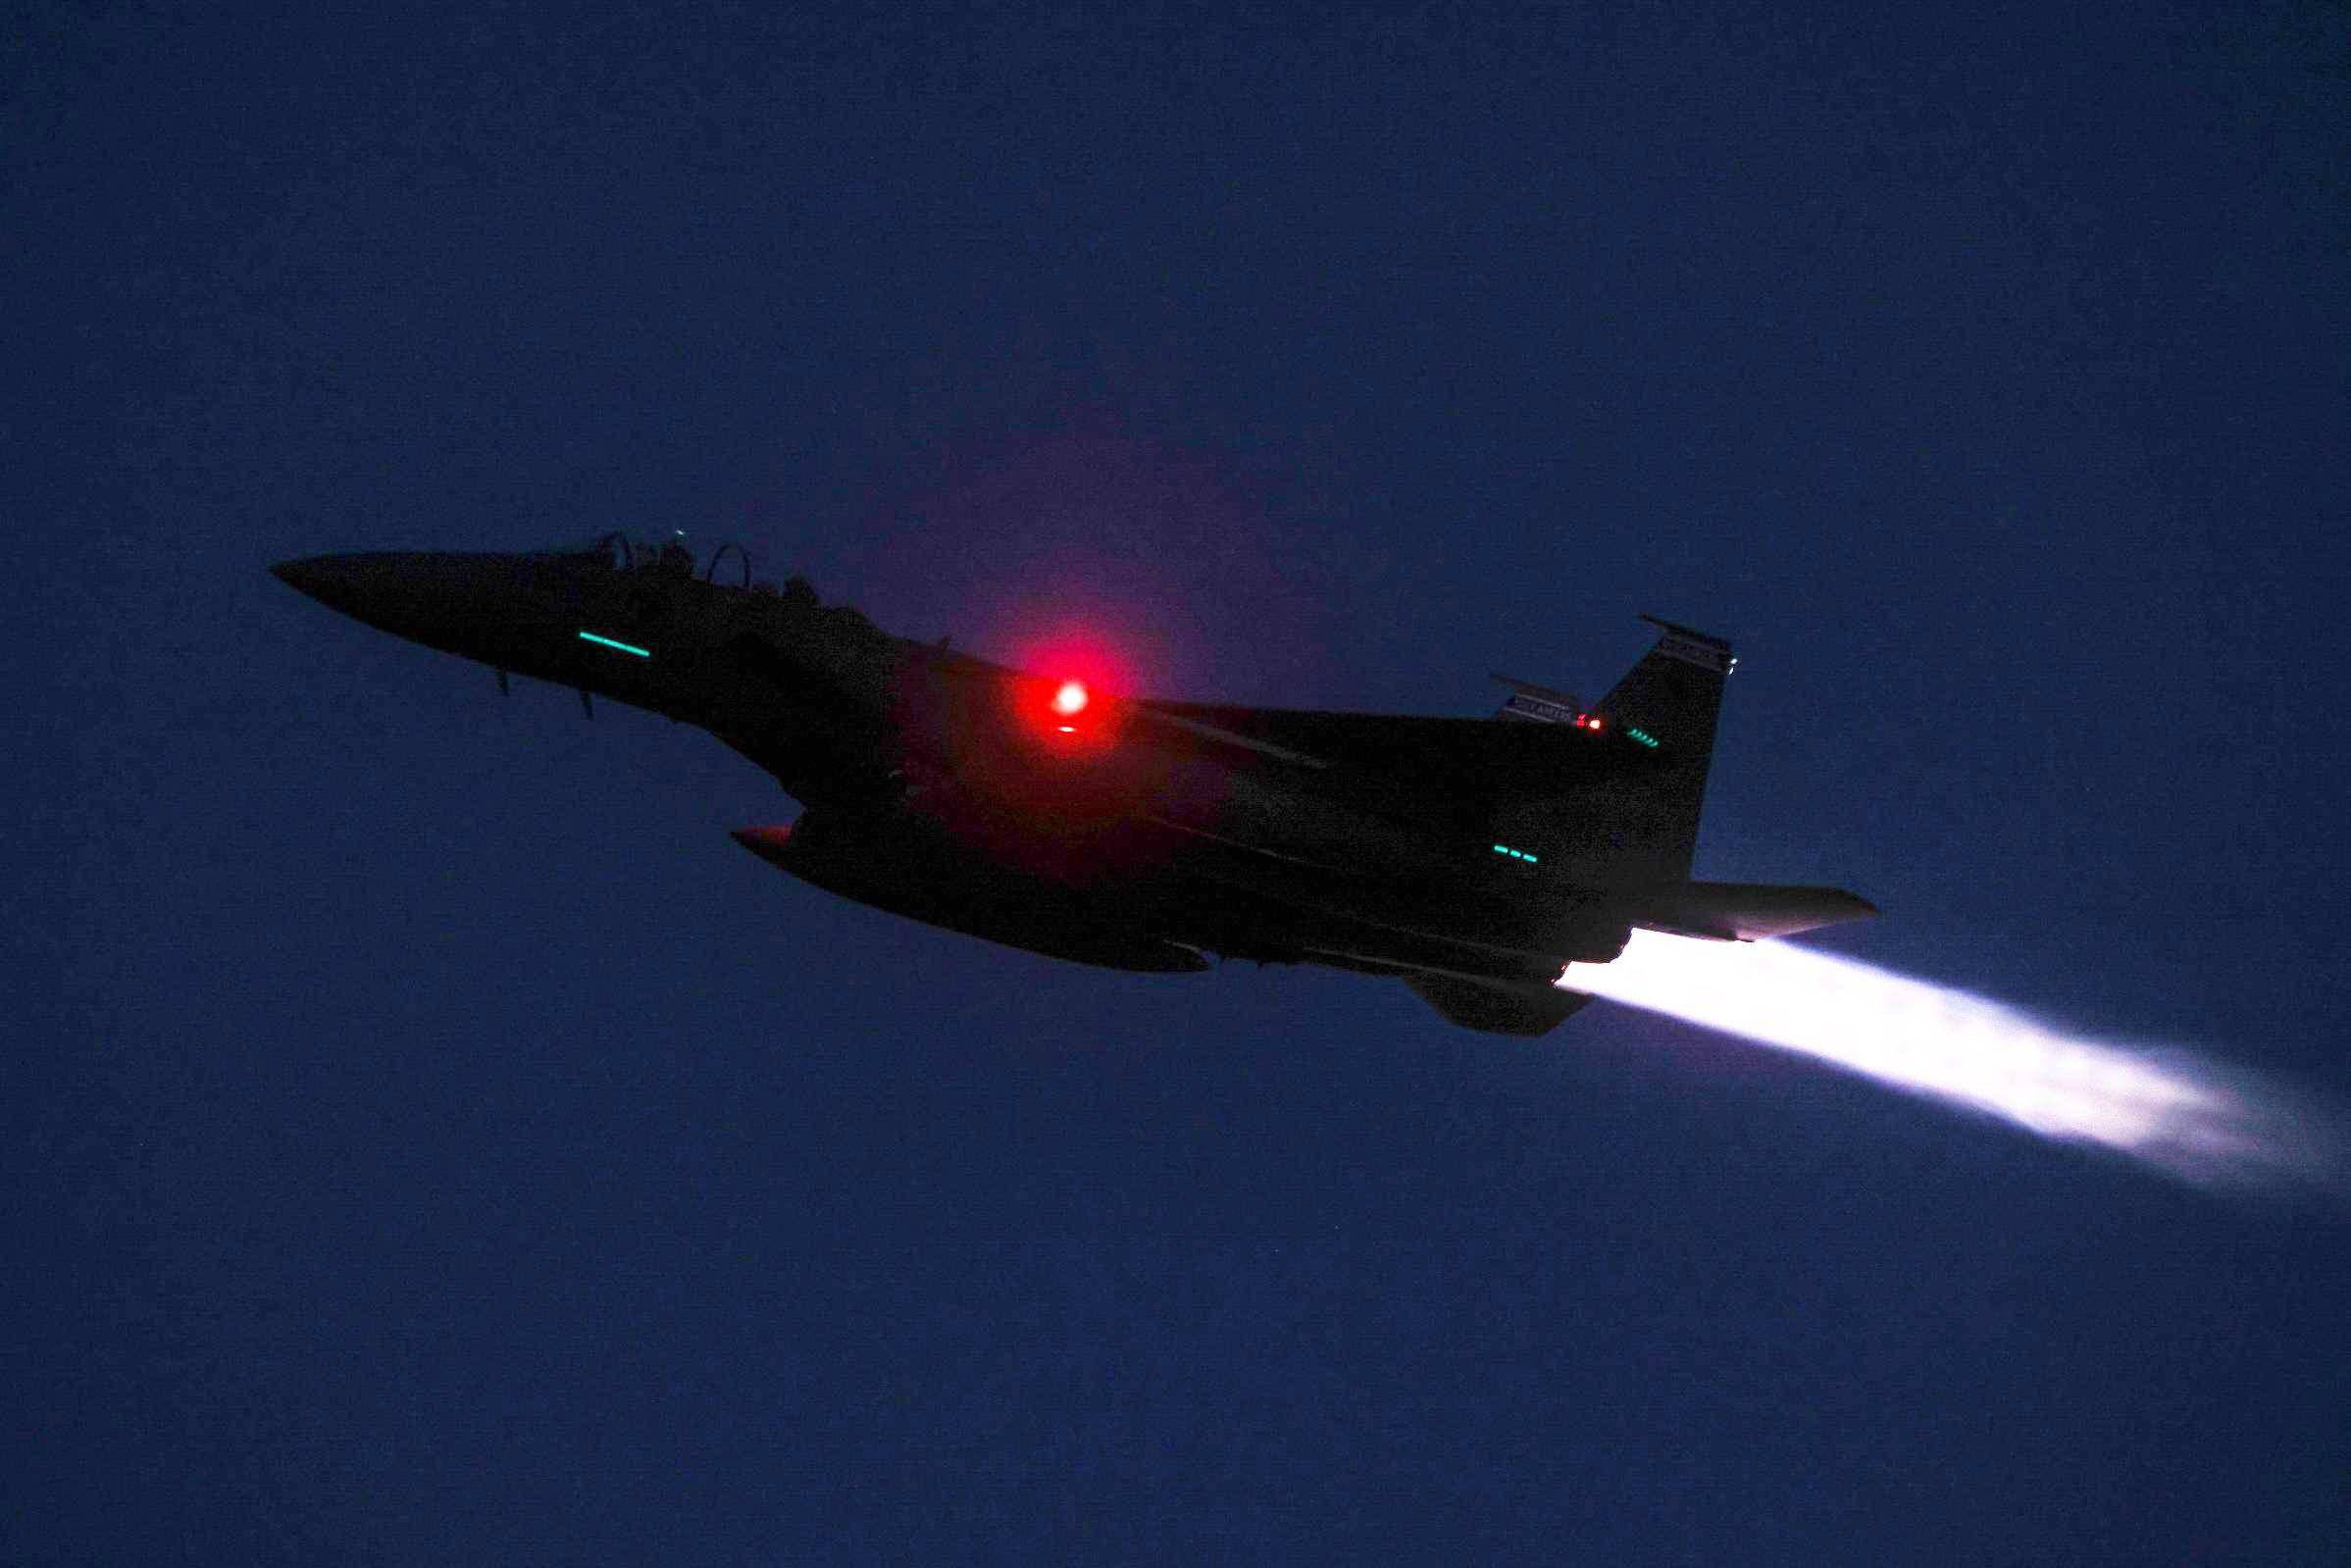 F-15SG departing for a night sortie